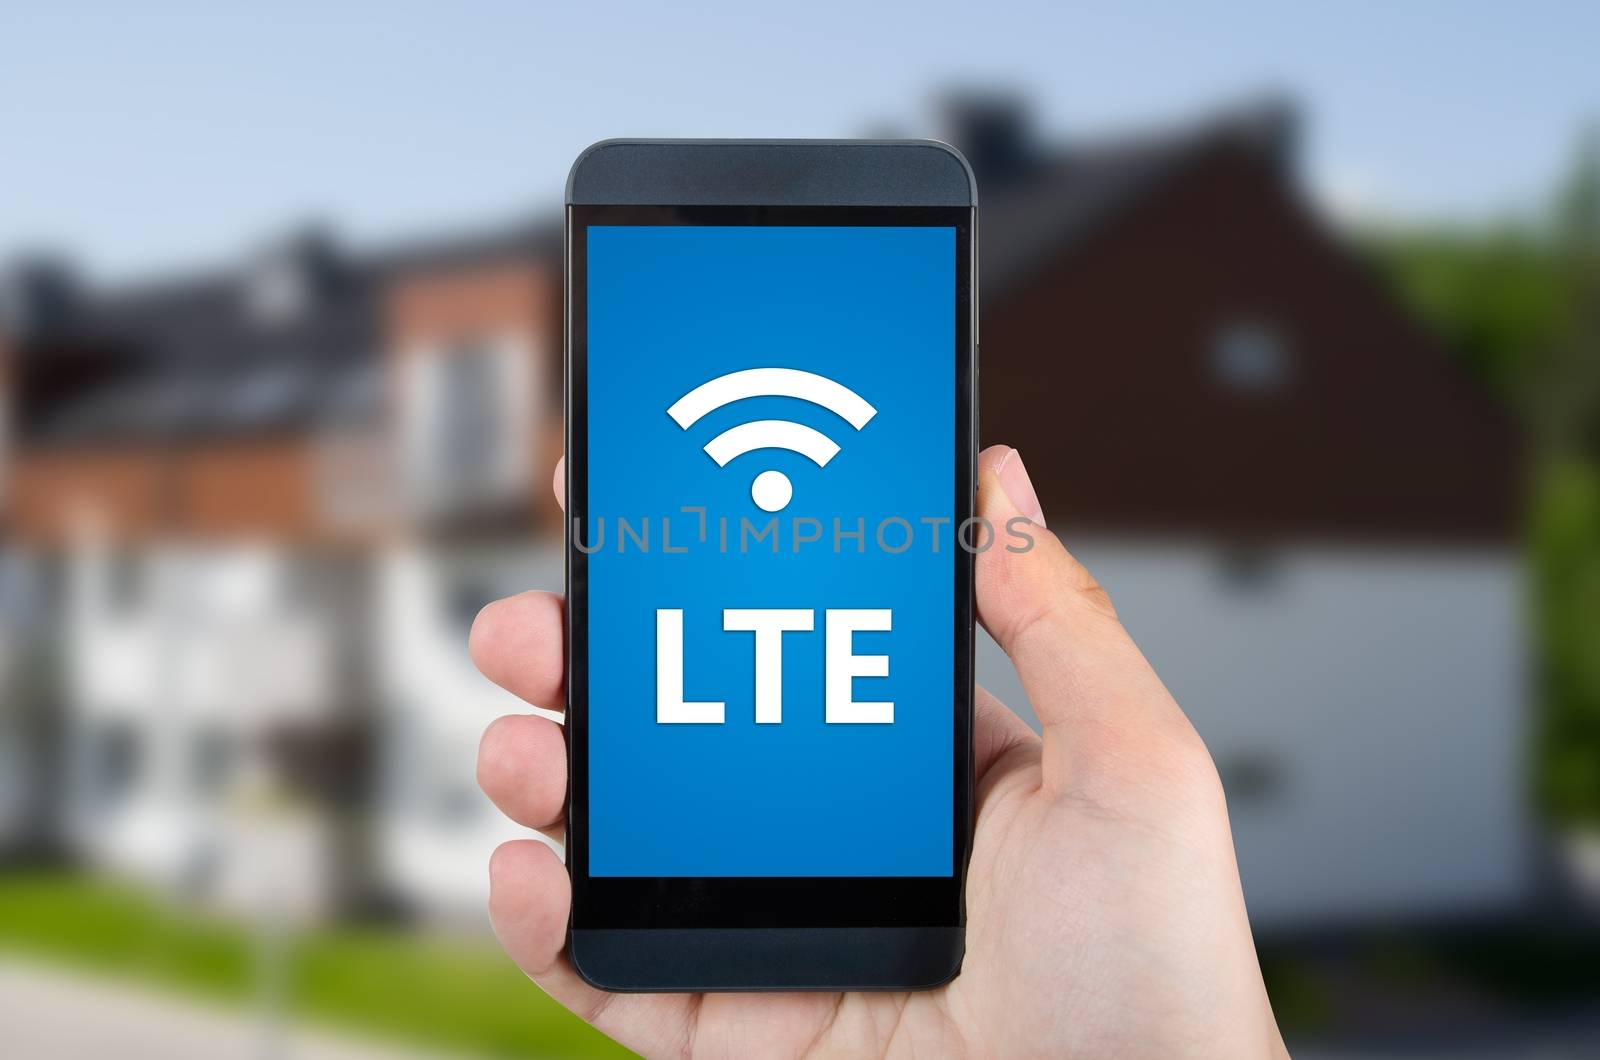 LTE high speed mobile internet connection device